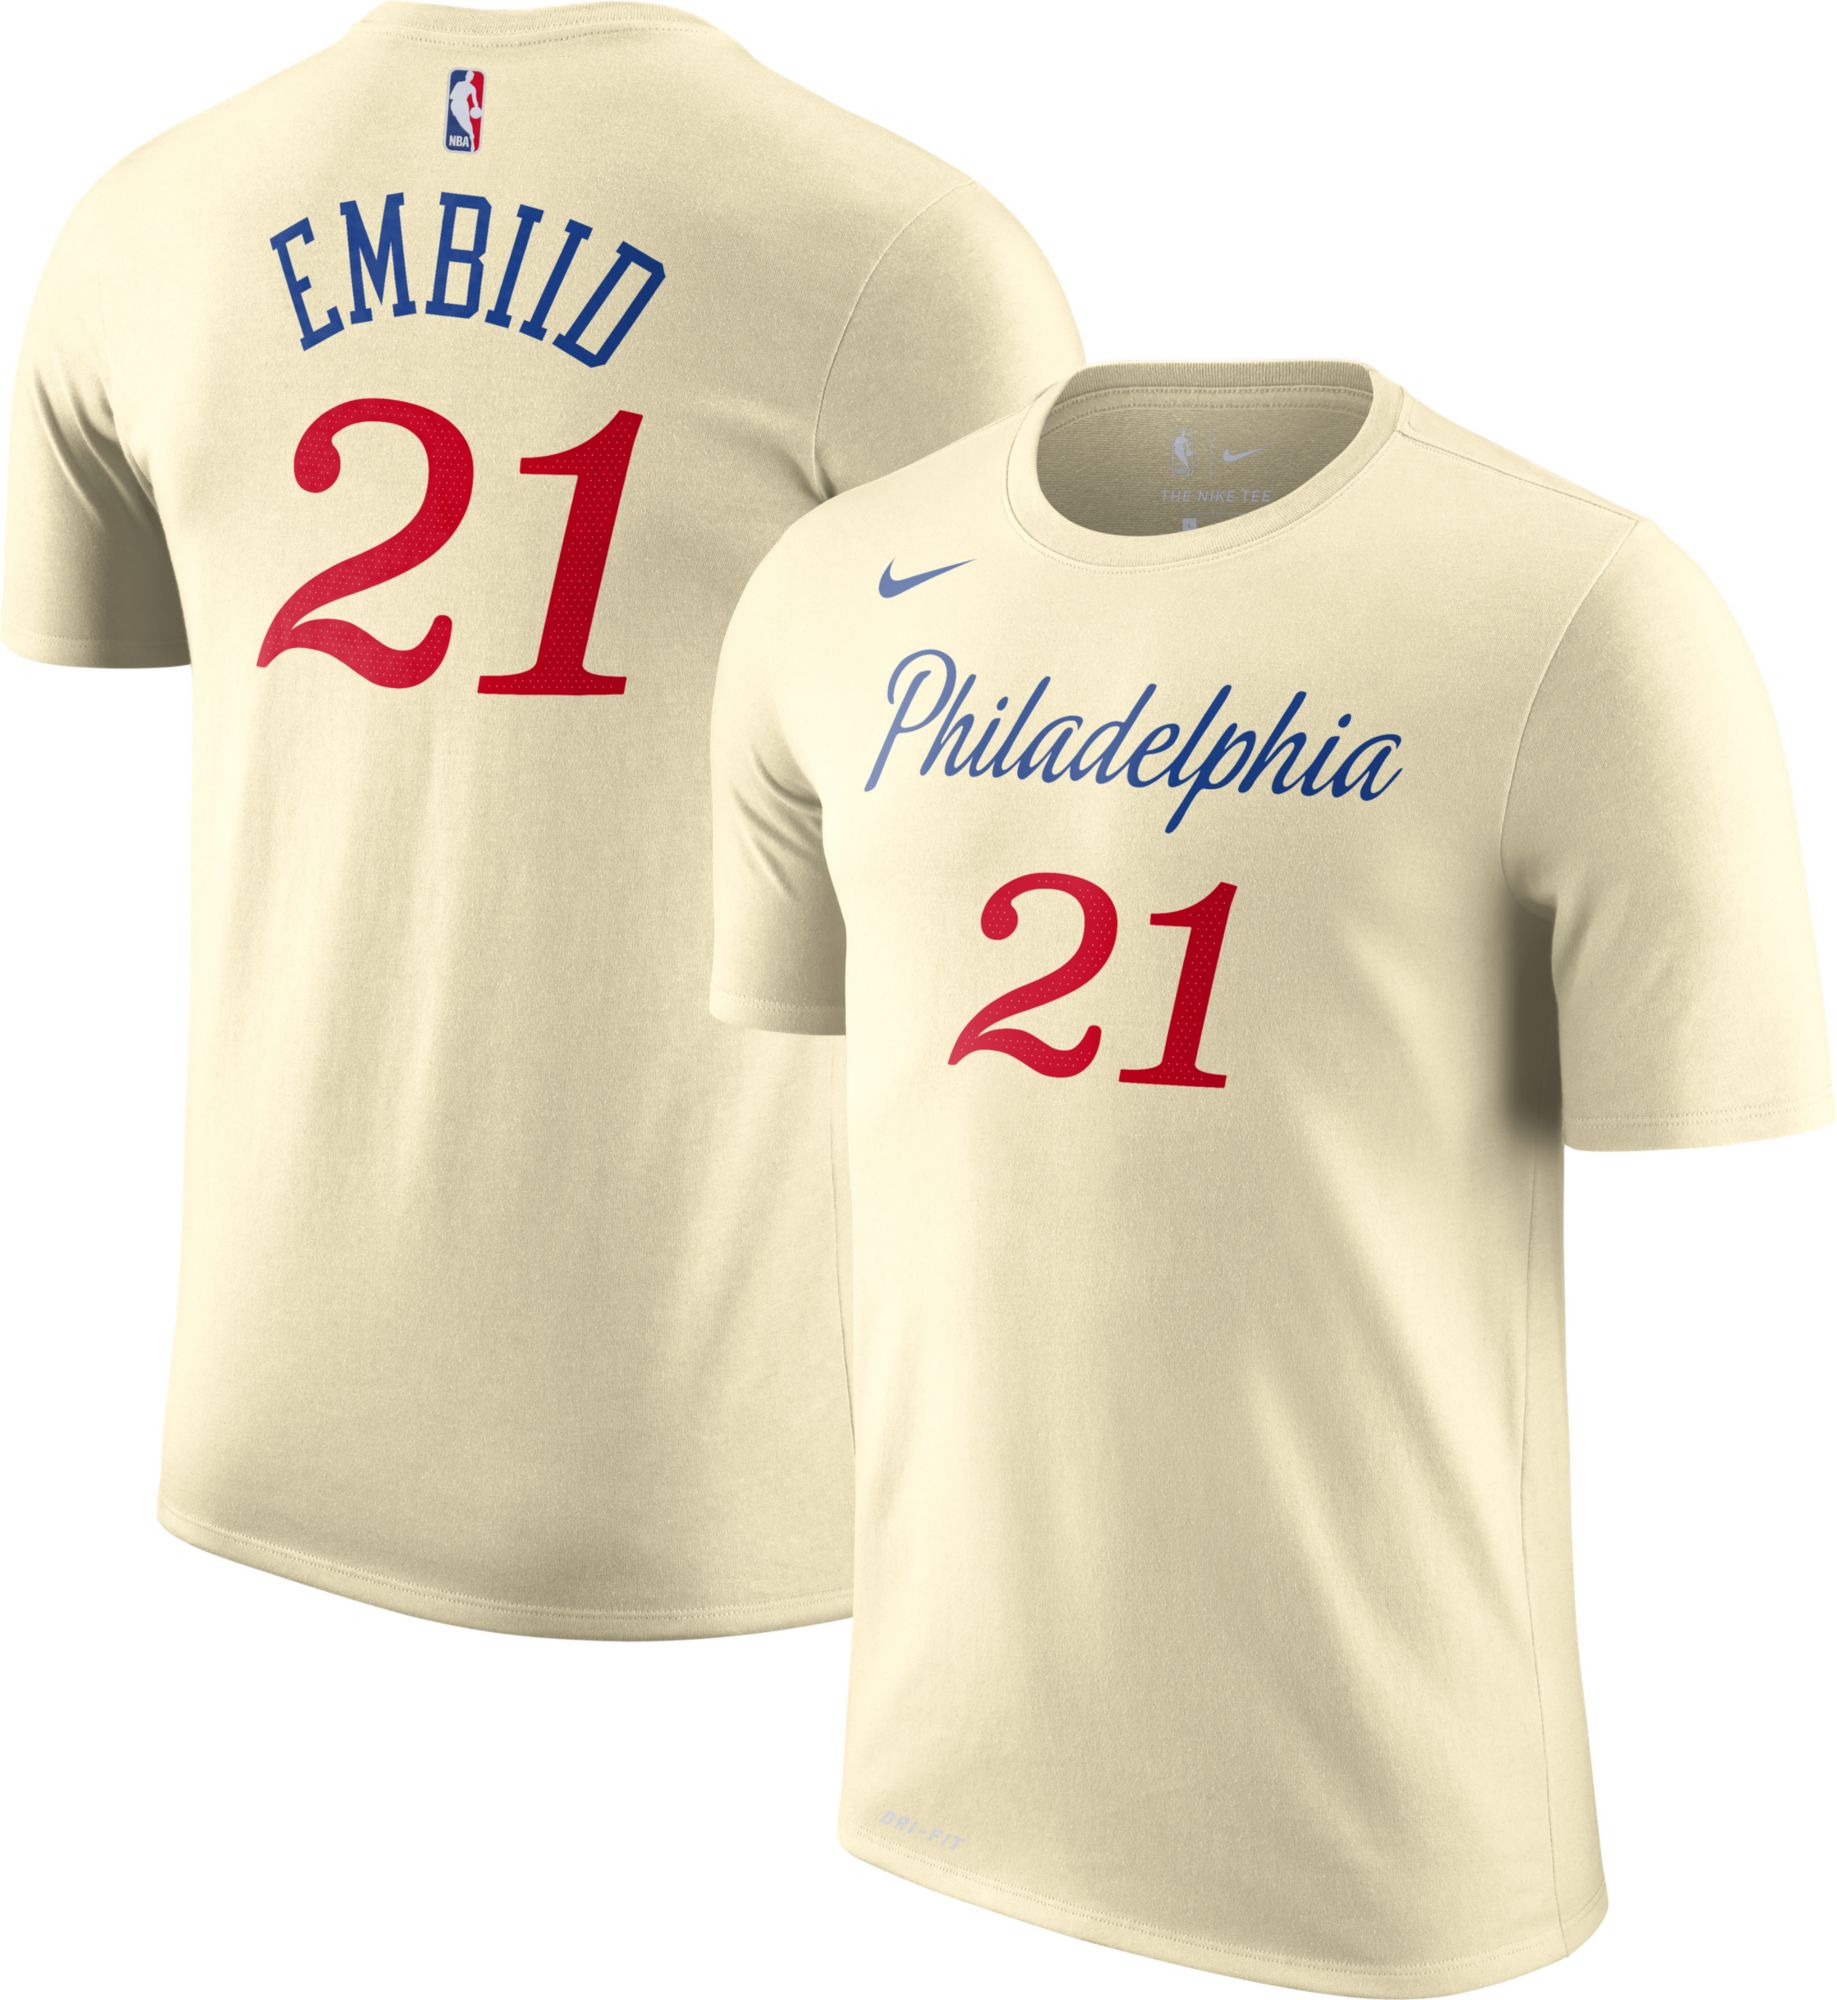 embiid city edition jersey